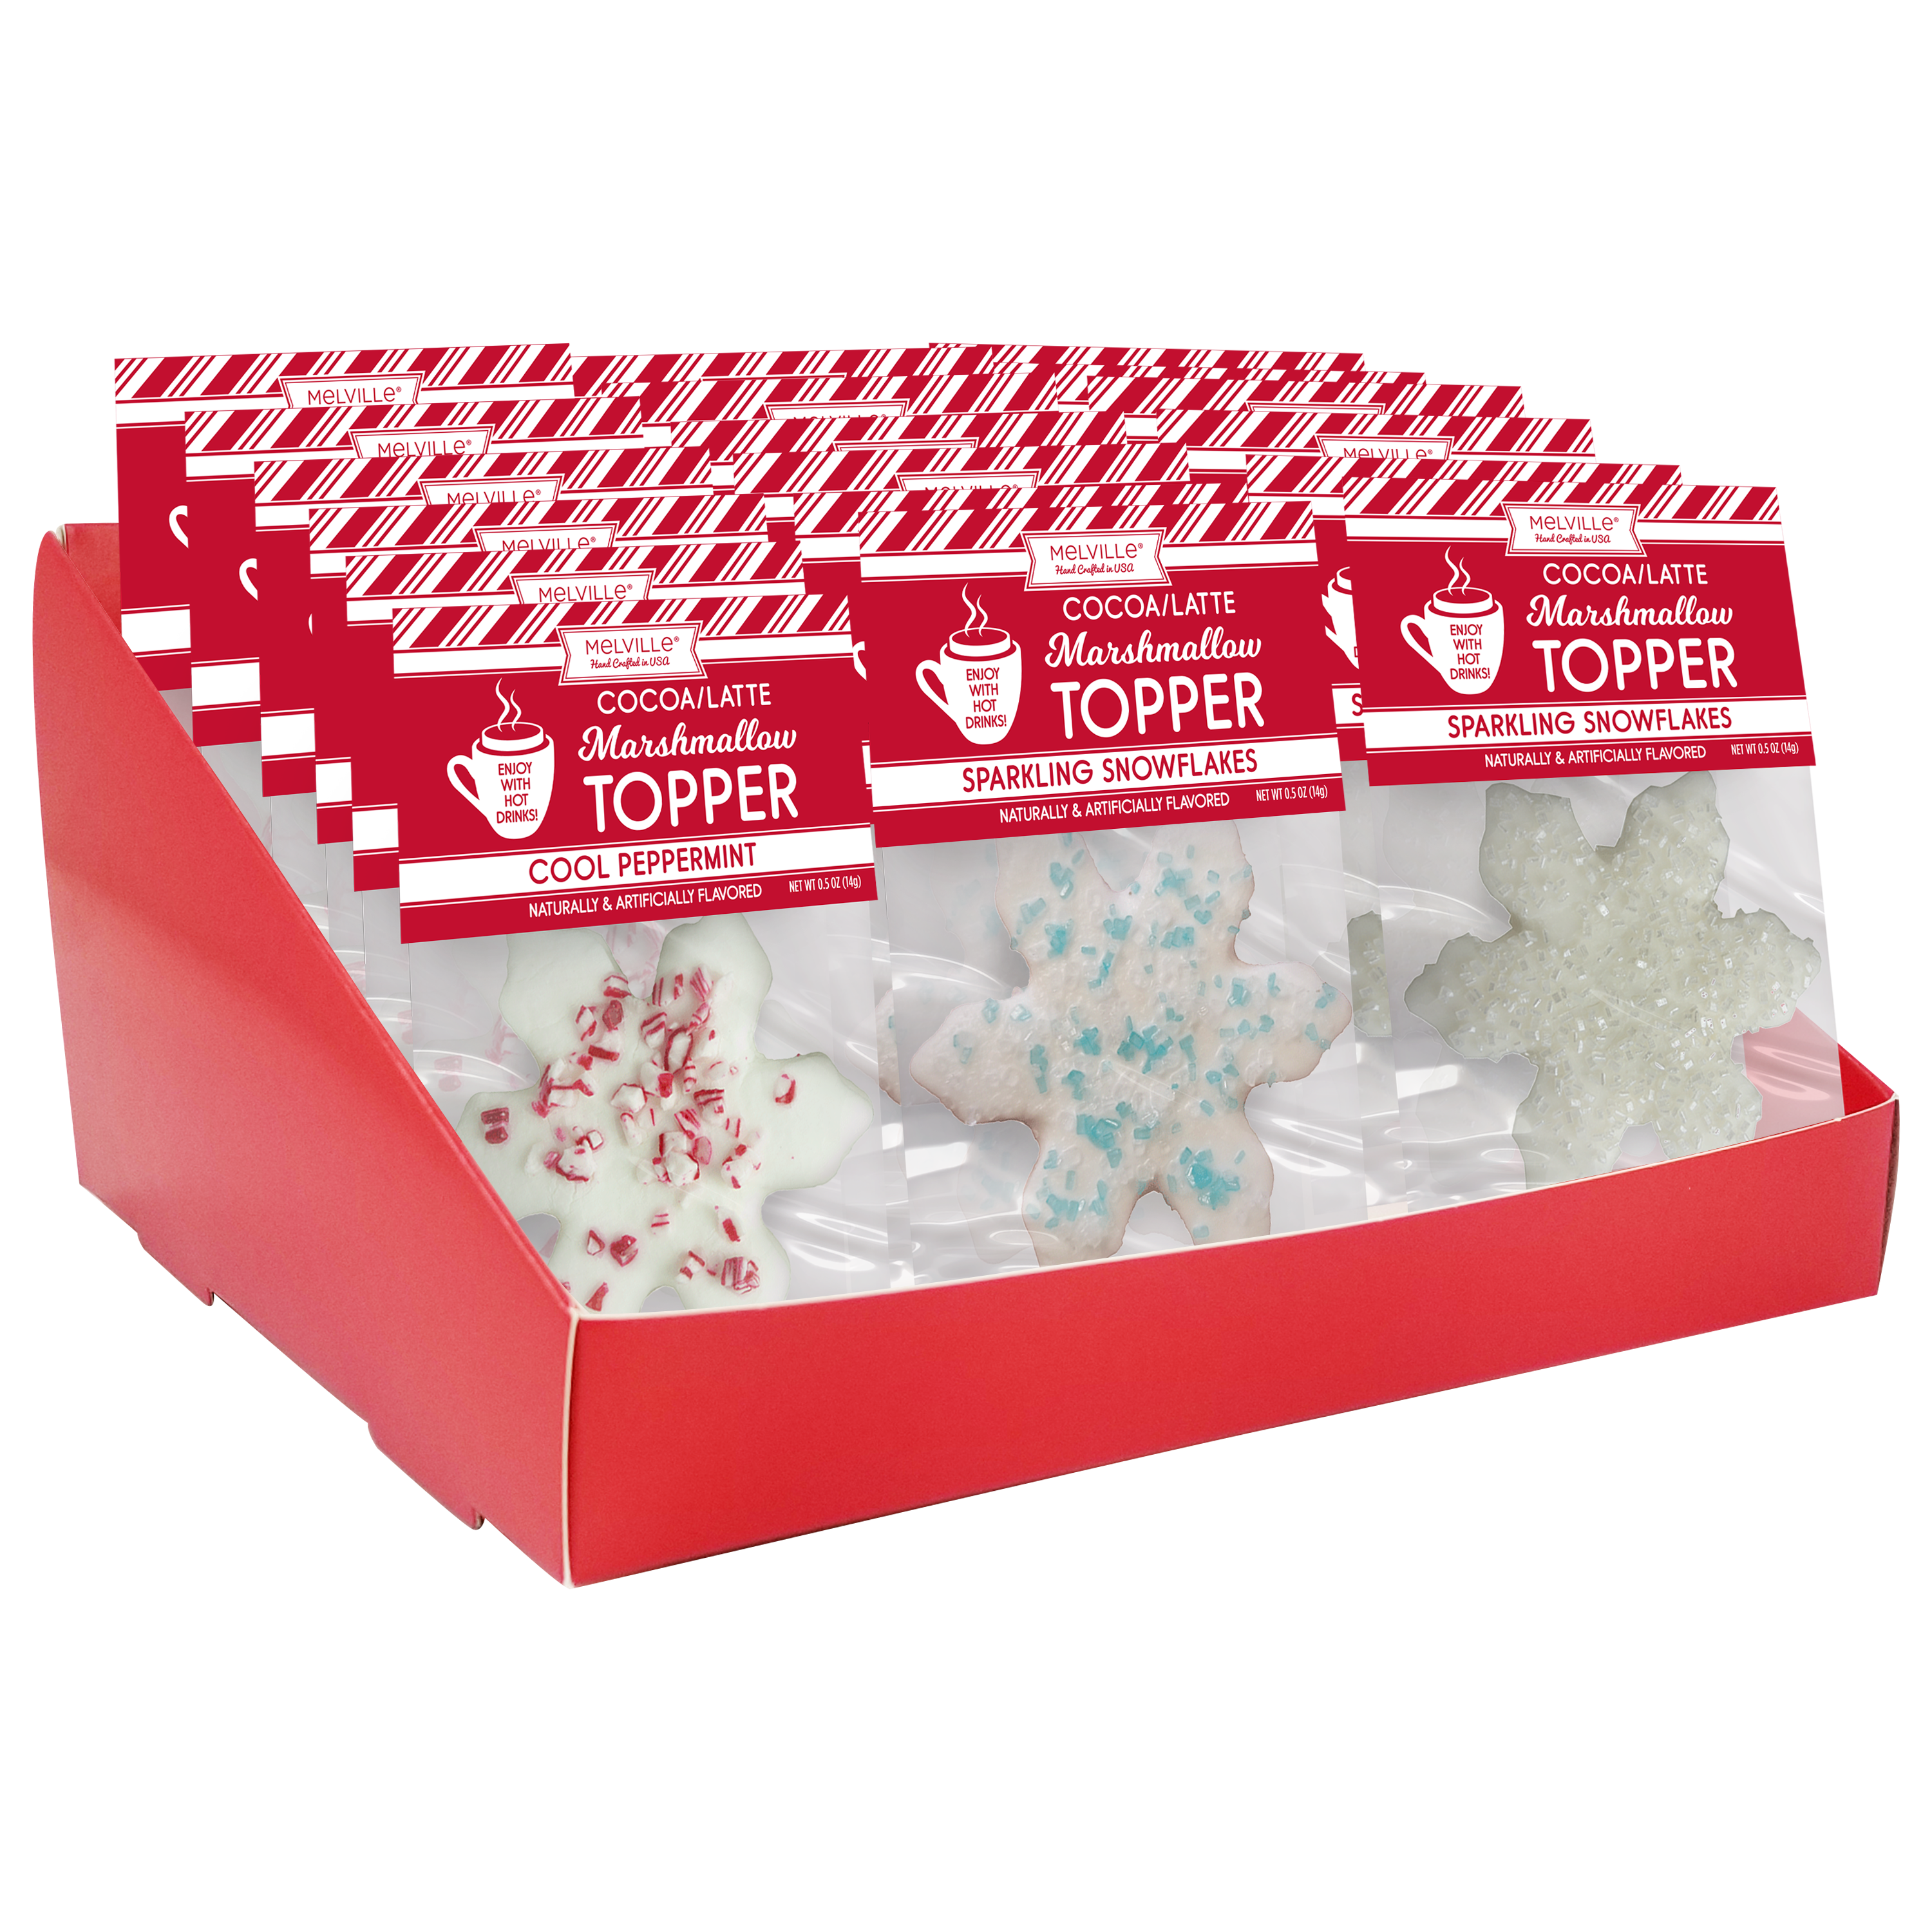 Snowflake Marshmallow Toppers - Assortment by Melville Candy Company